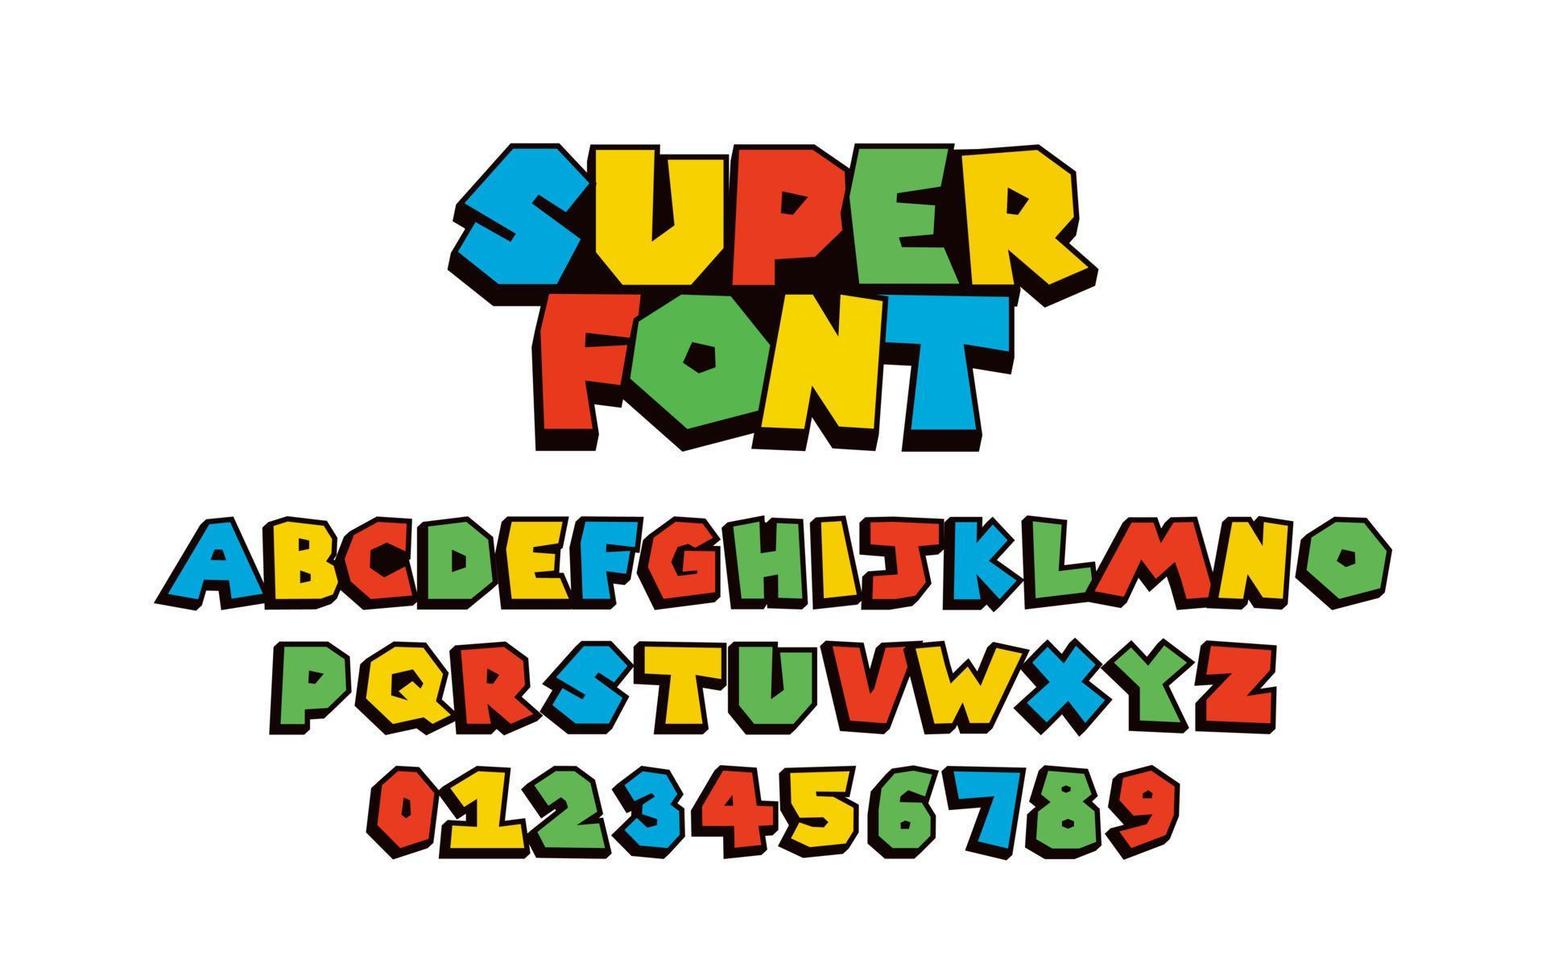 Super font colorful vector illustration of modern abstract alphabet